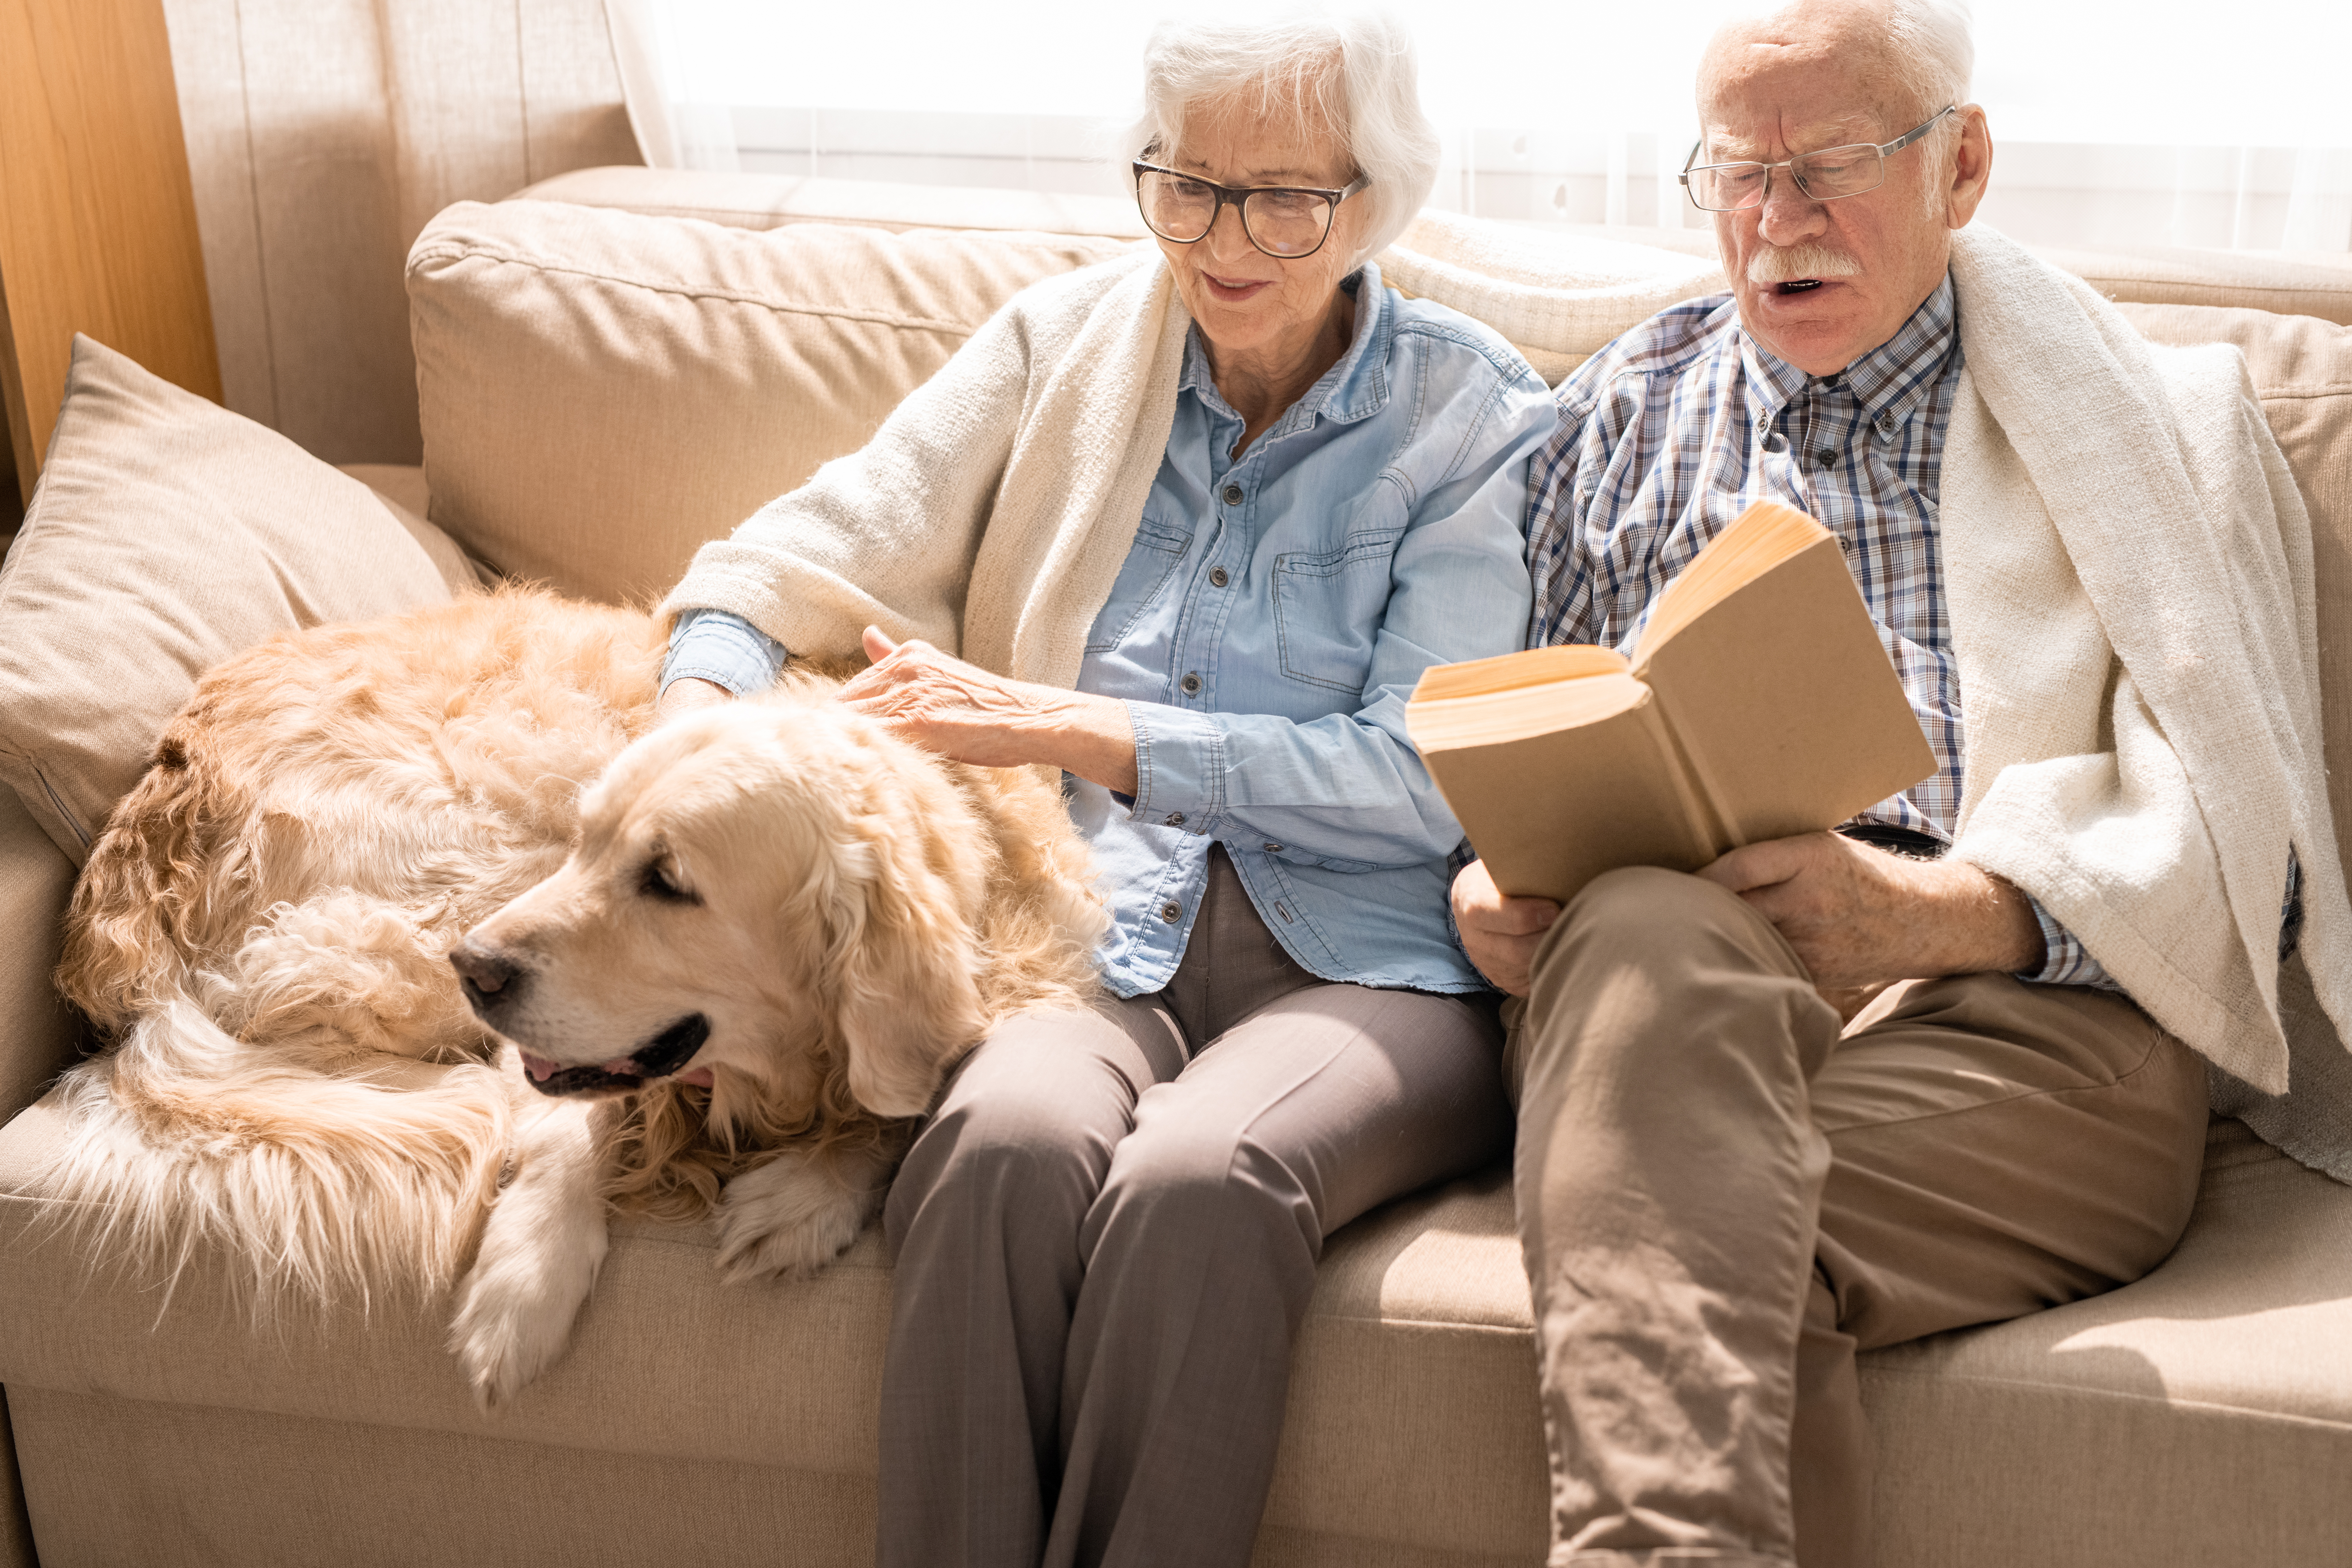 The Impact of Robotic Companion Pets on Depression and Loneliness for Older Adults with Dementia During the COVID-19 Pandemic